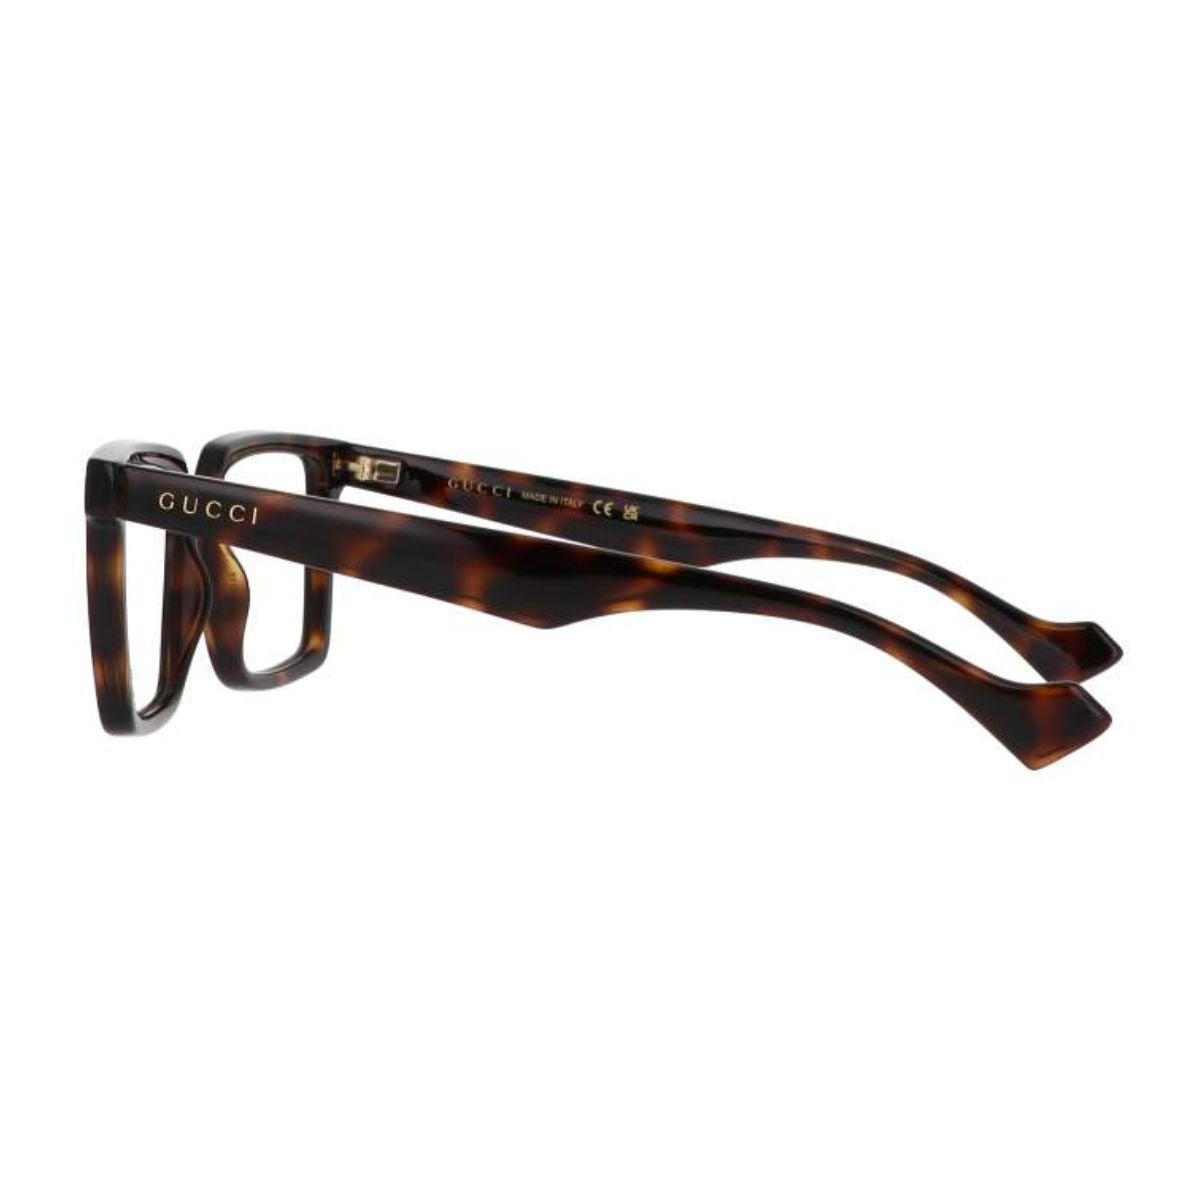 "Gucci 1540O 002 Frame stylish for men and women glasses frames at optorium"